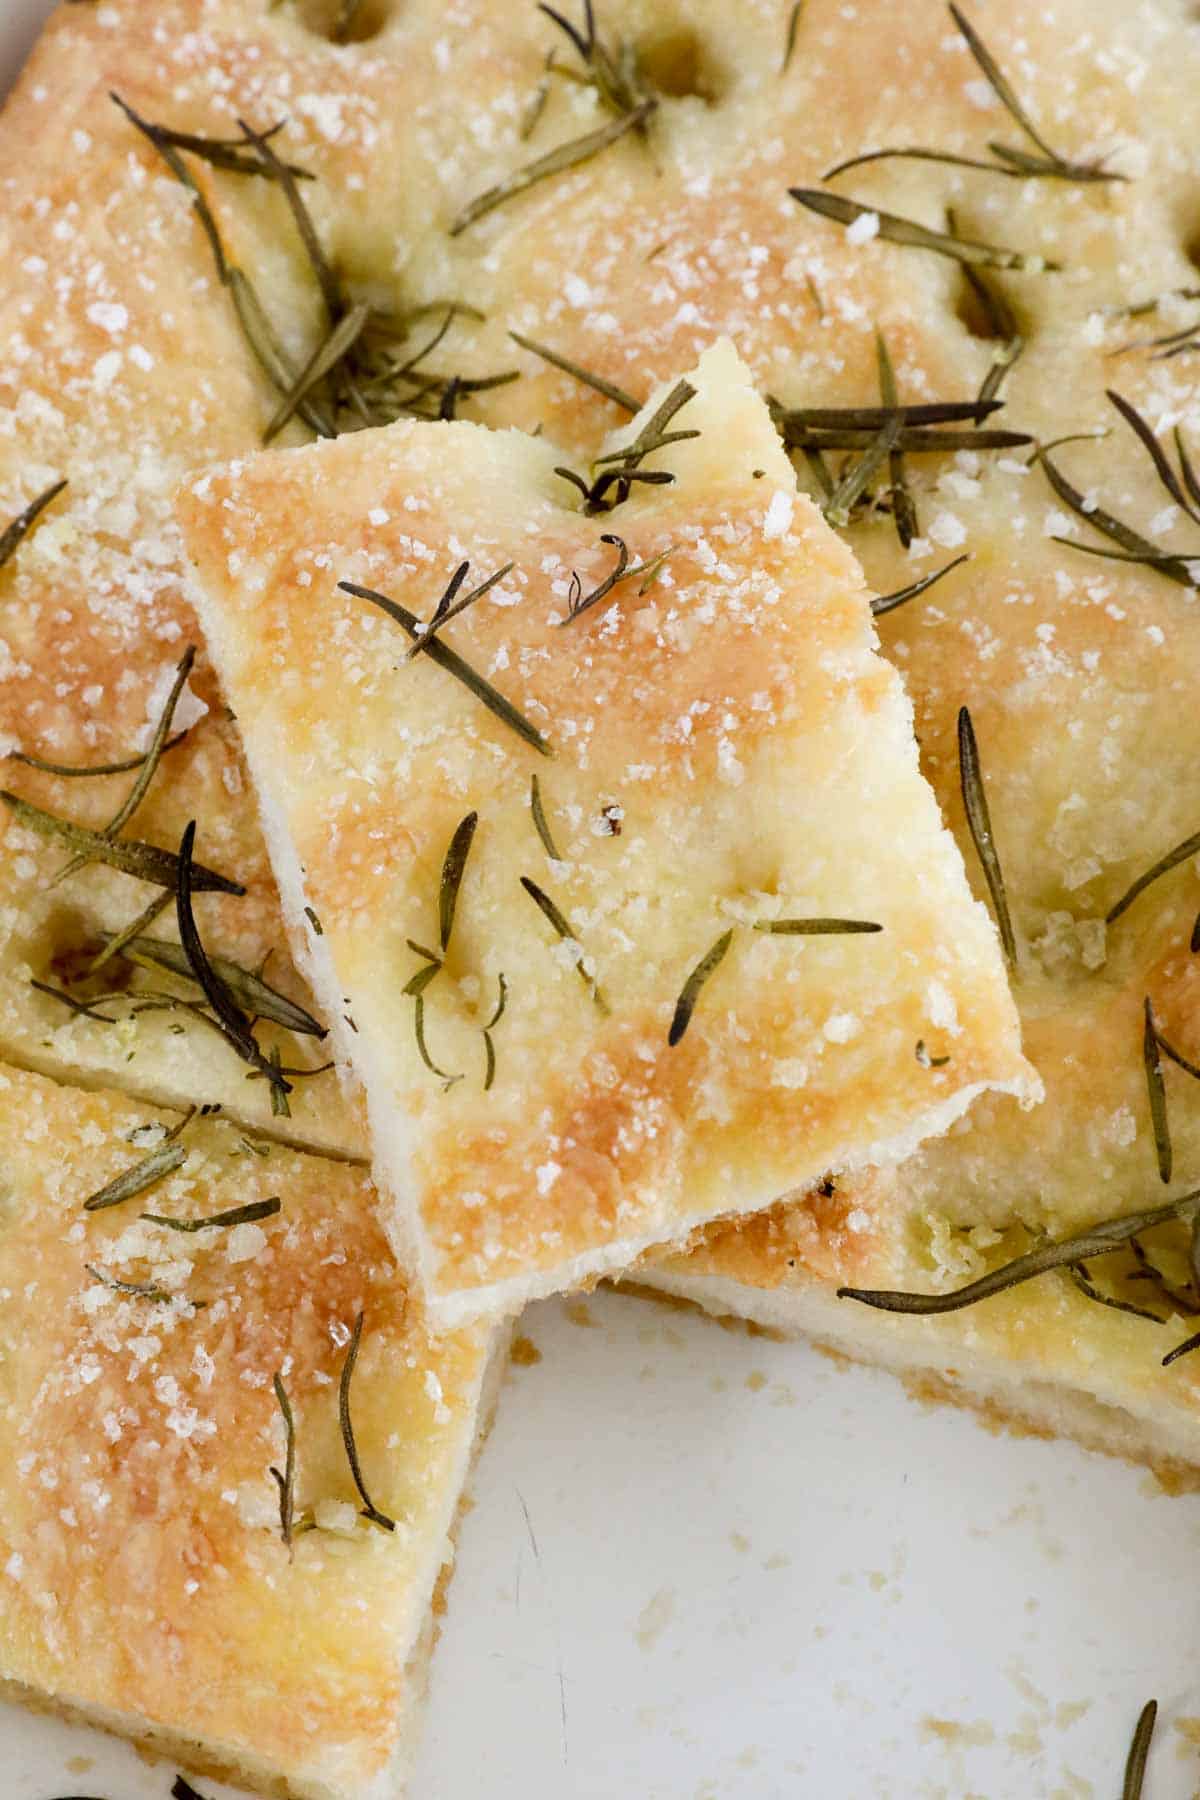 A piece of homemade focaccia with rosemary and sea salt on top.